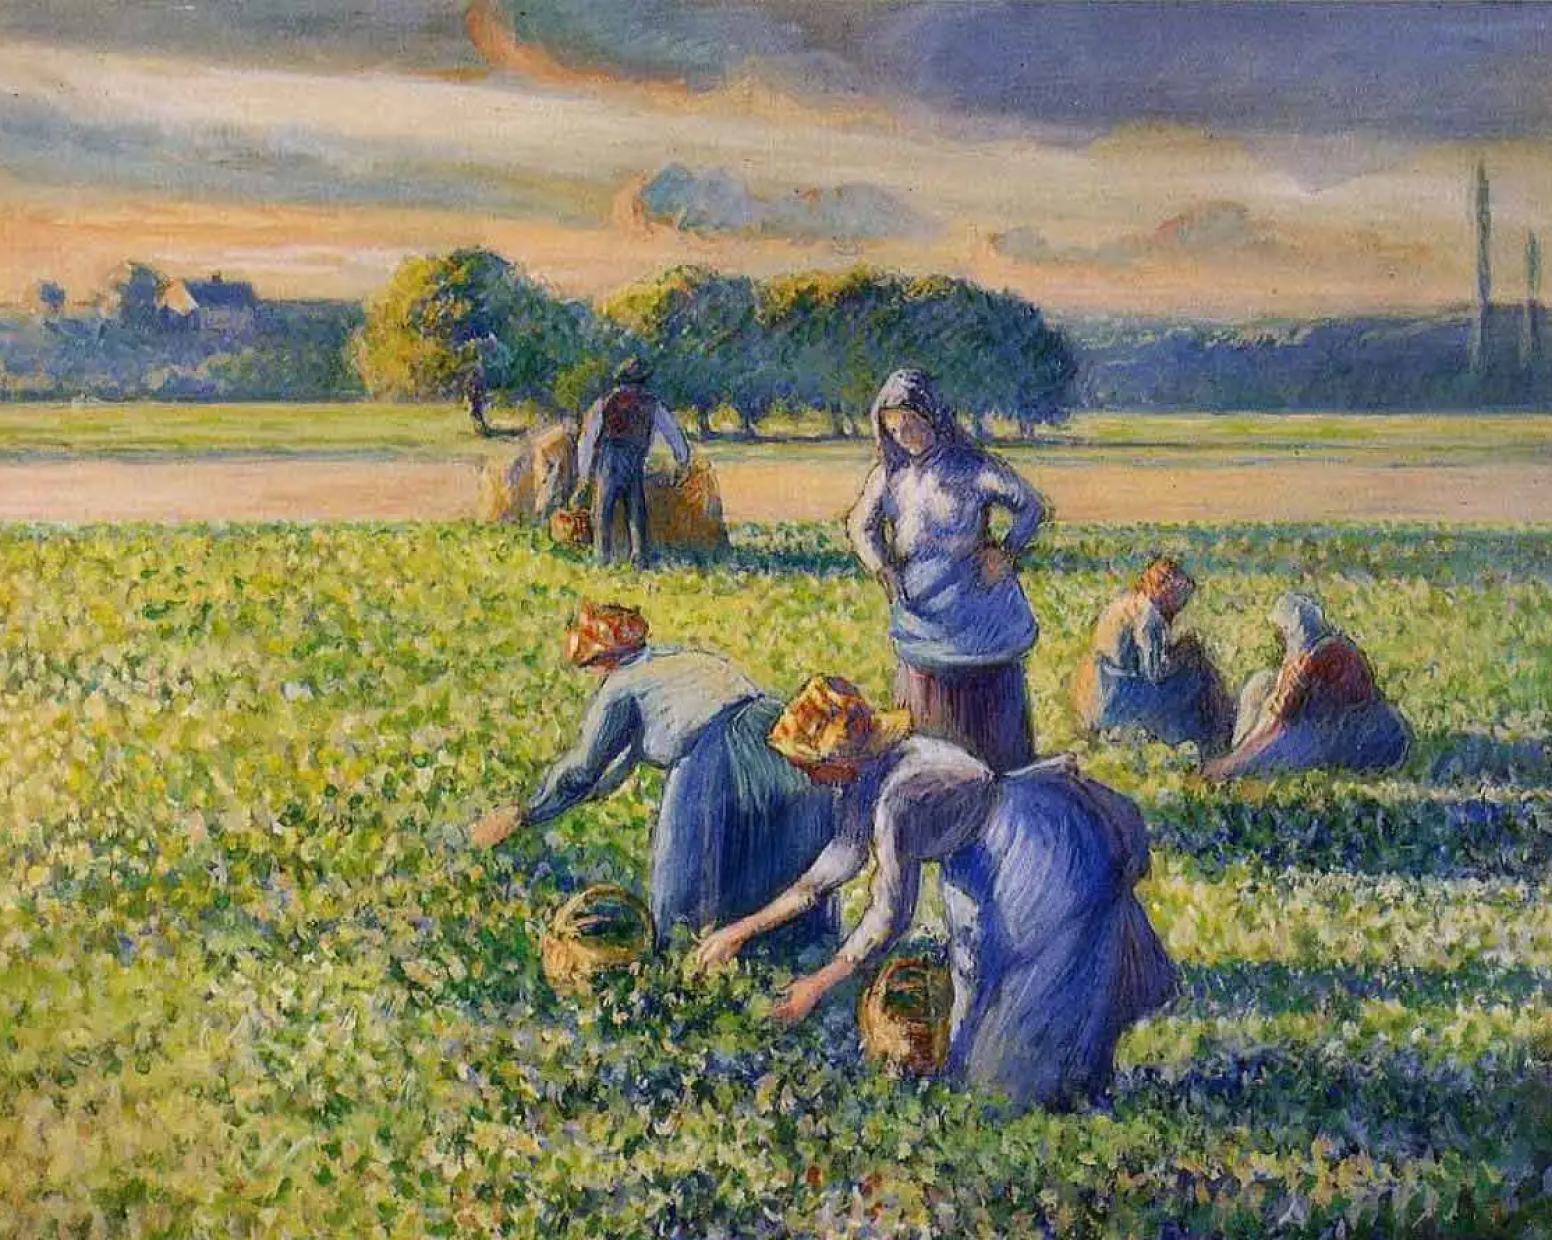 Picking Peas by Camille Pissarro, 1887